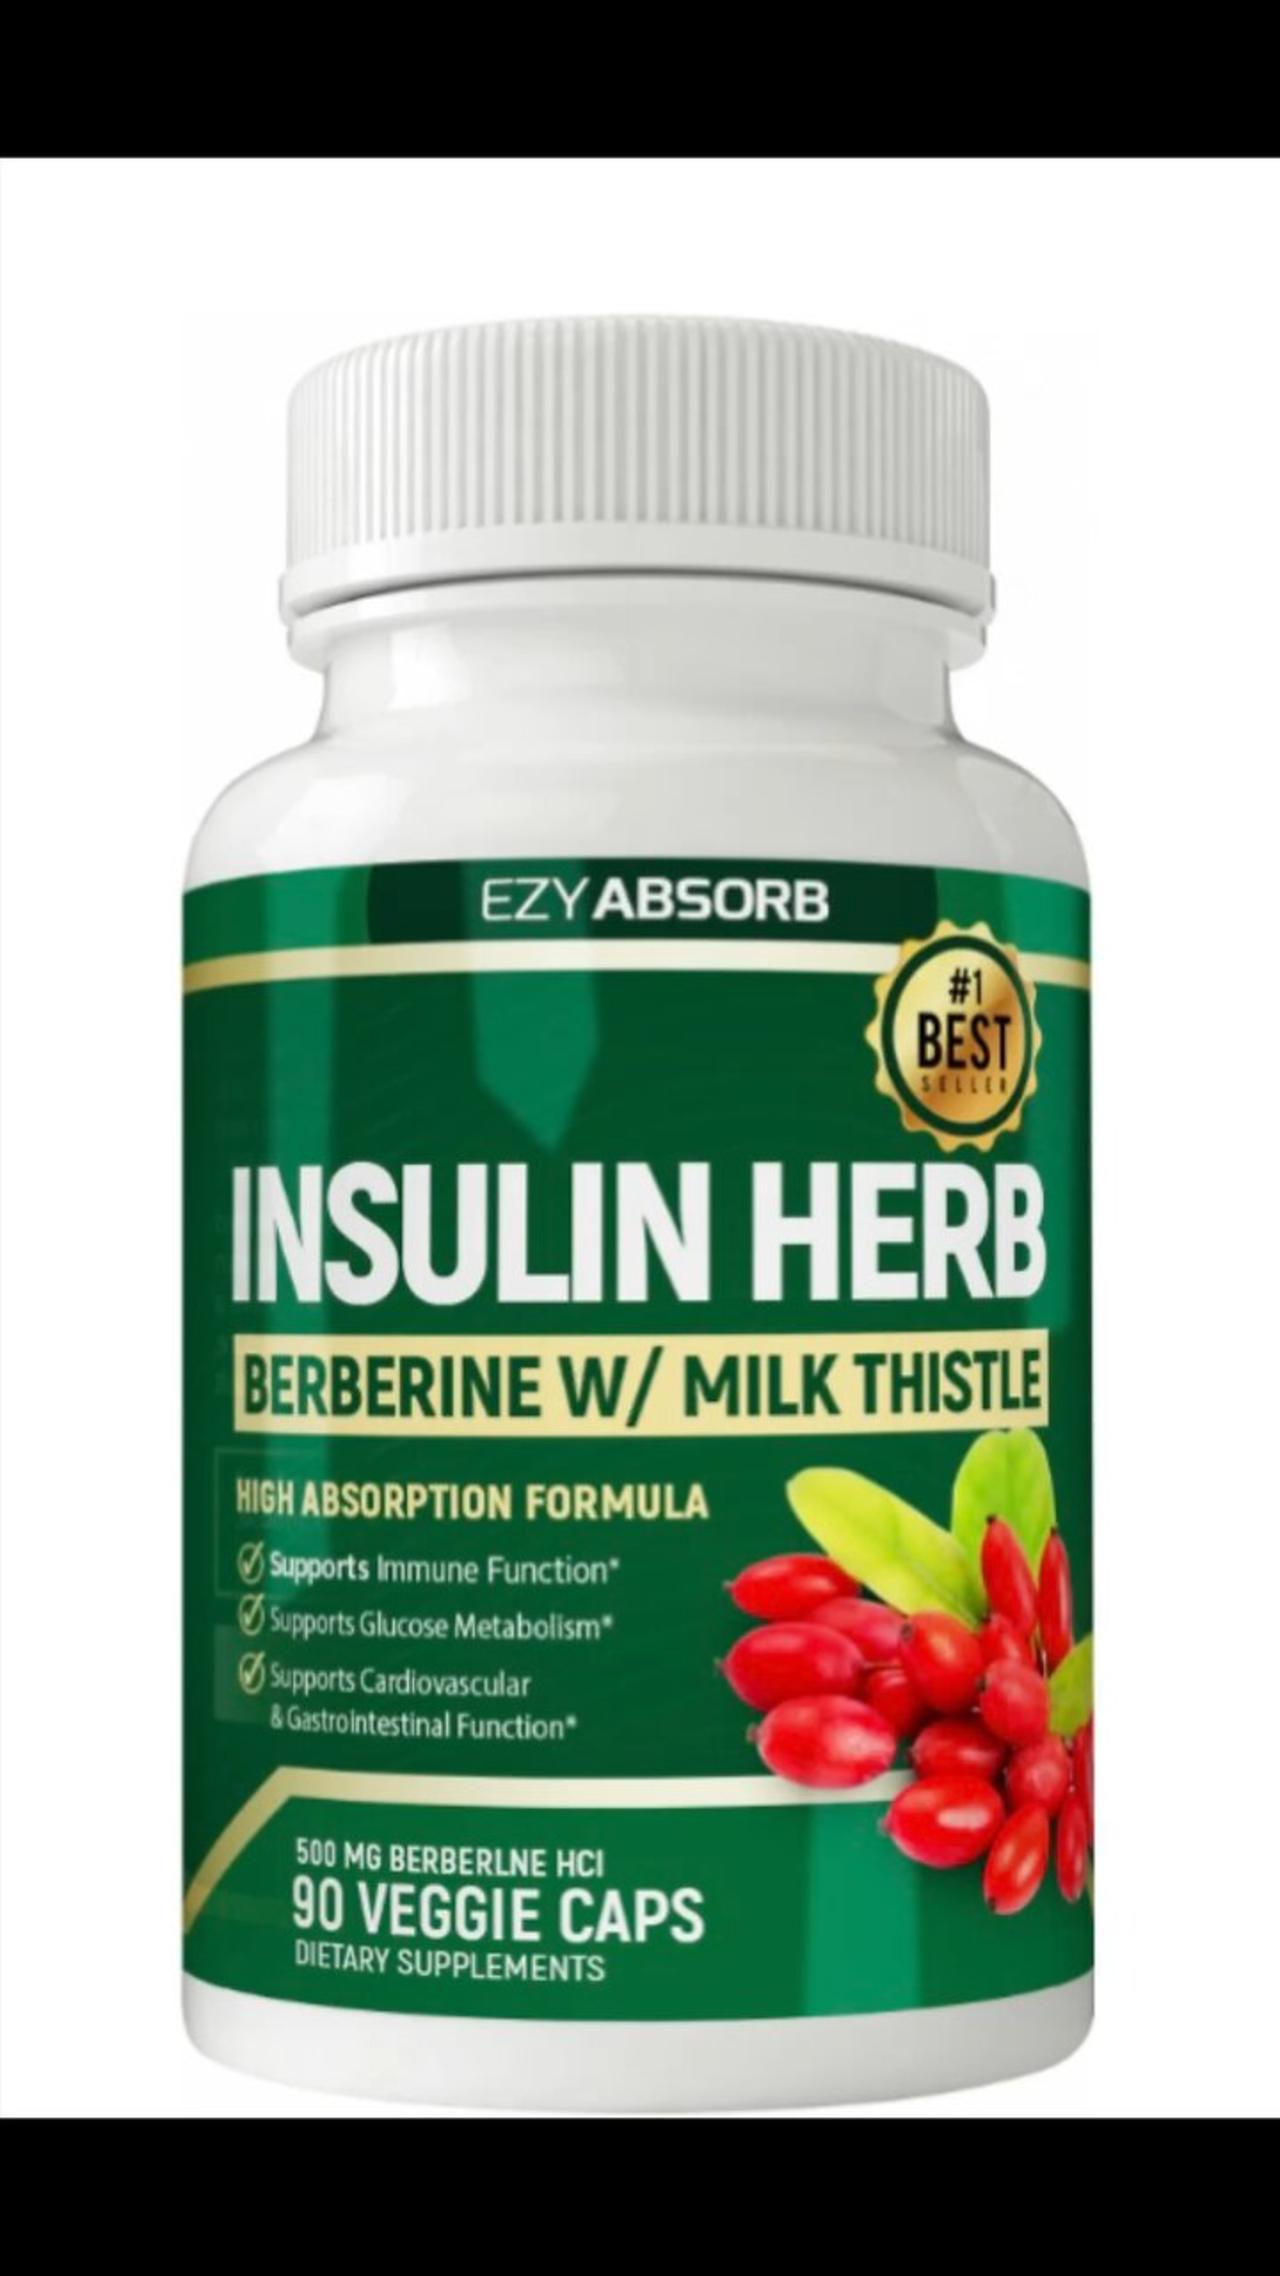 The Insulin Herb for Diabetes a Berberine Supplement with Milk Thistle